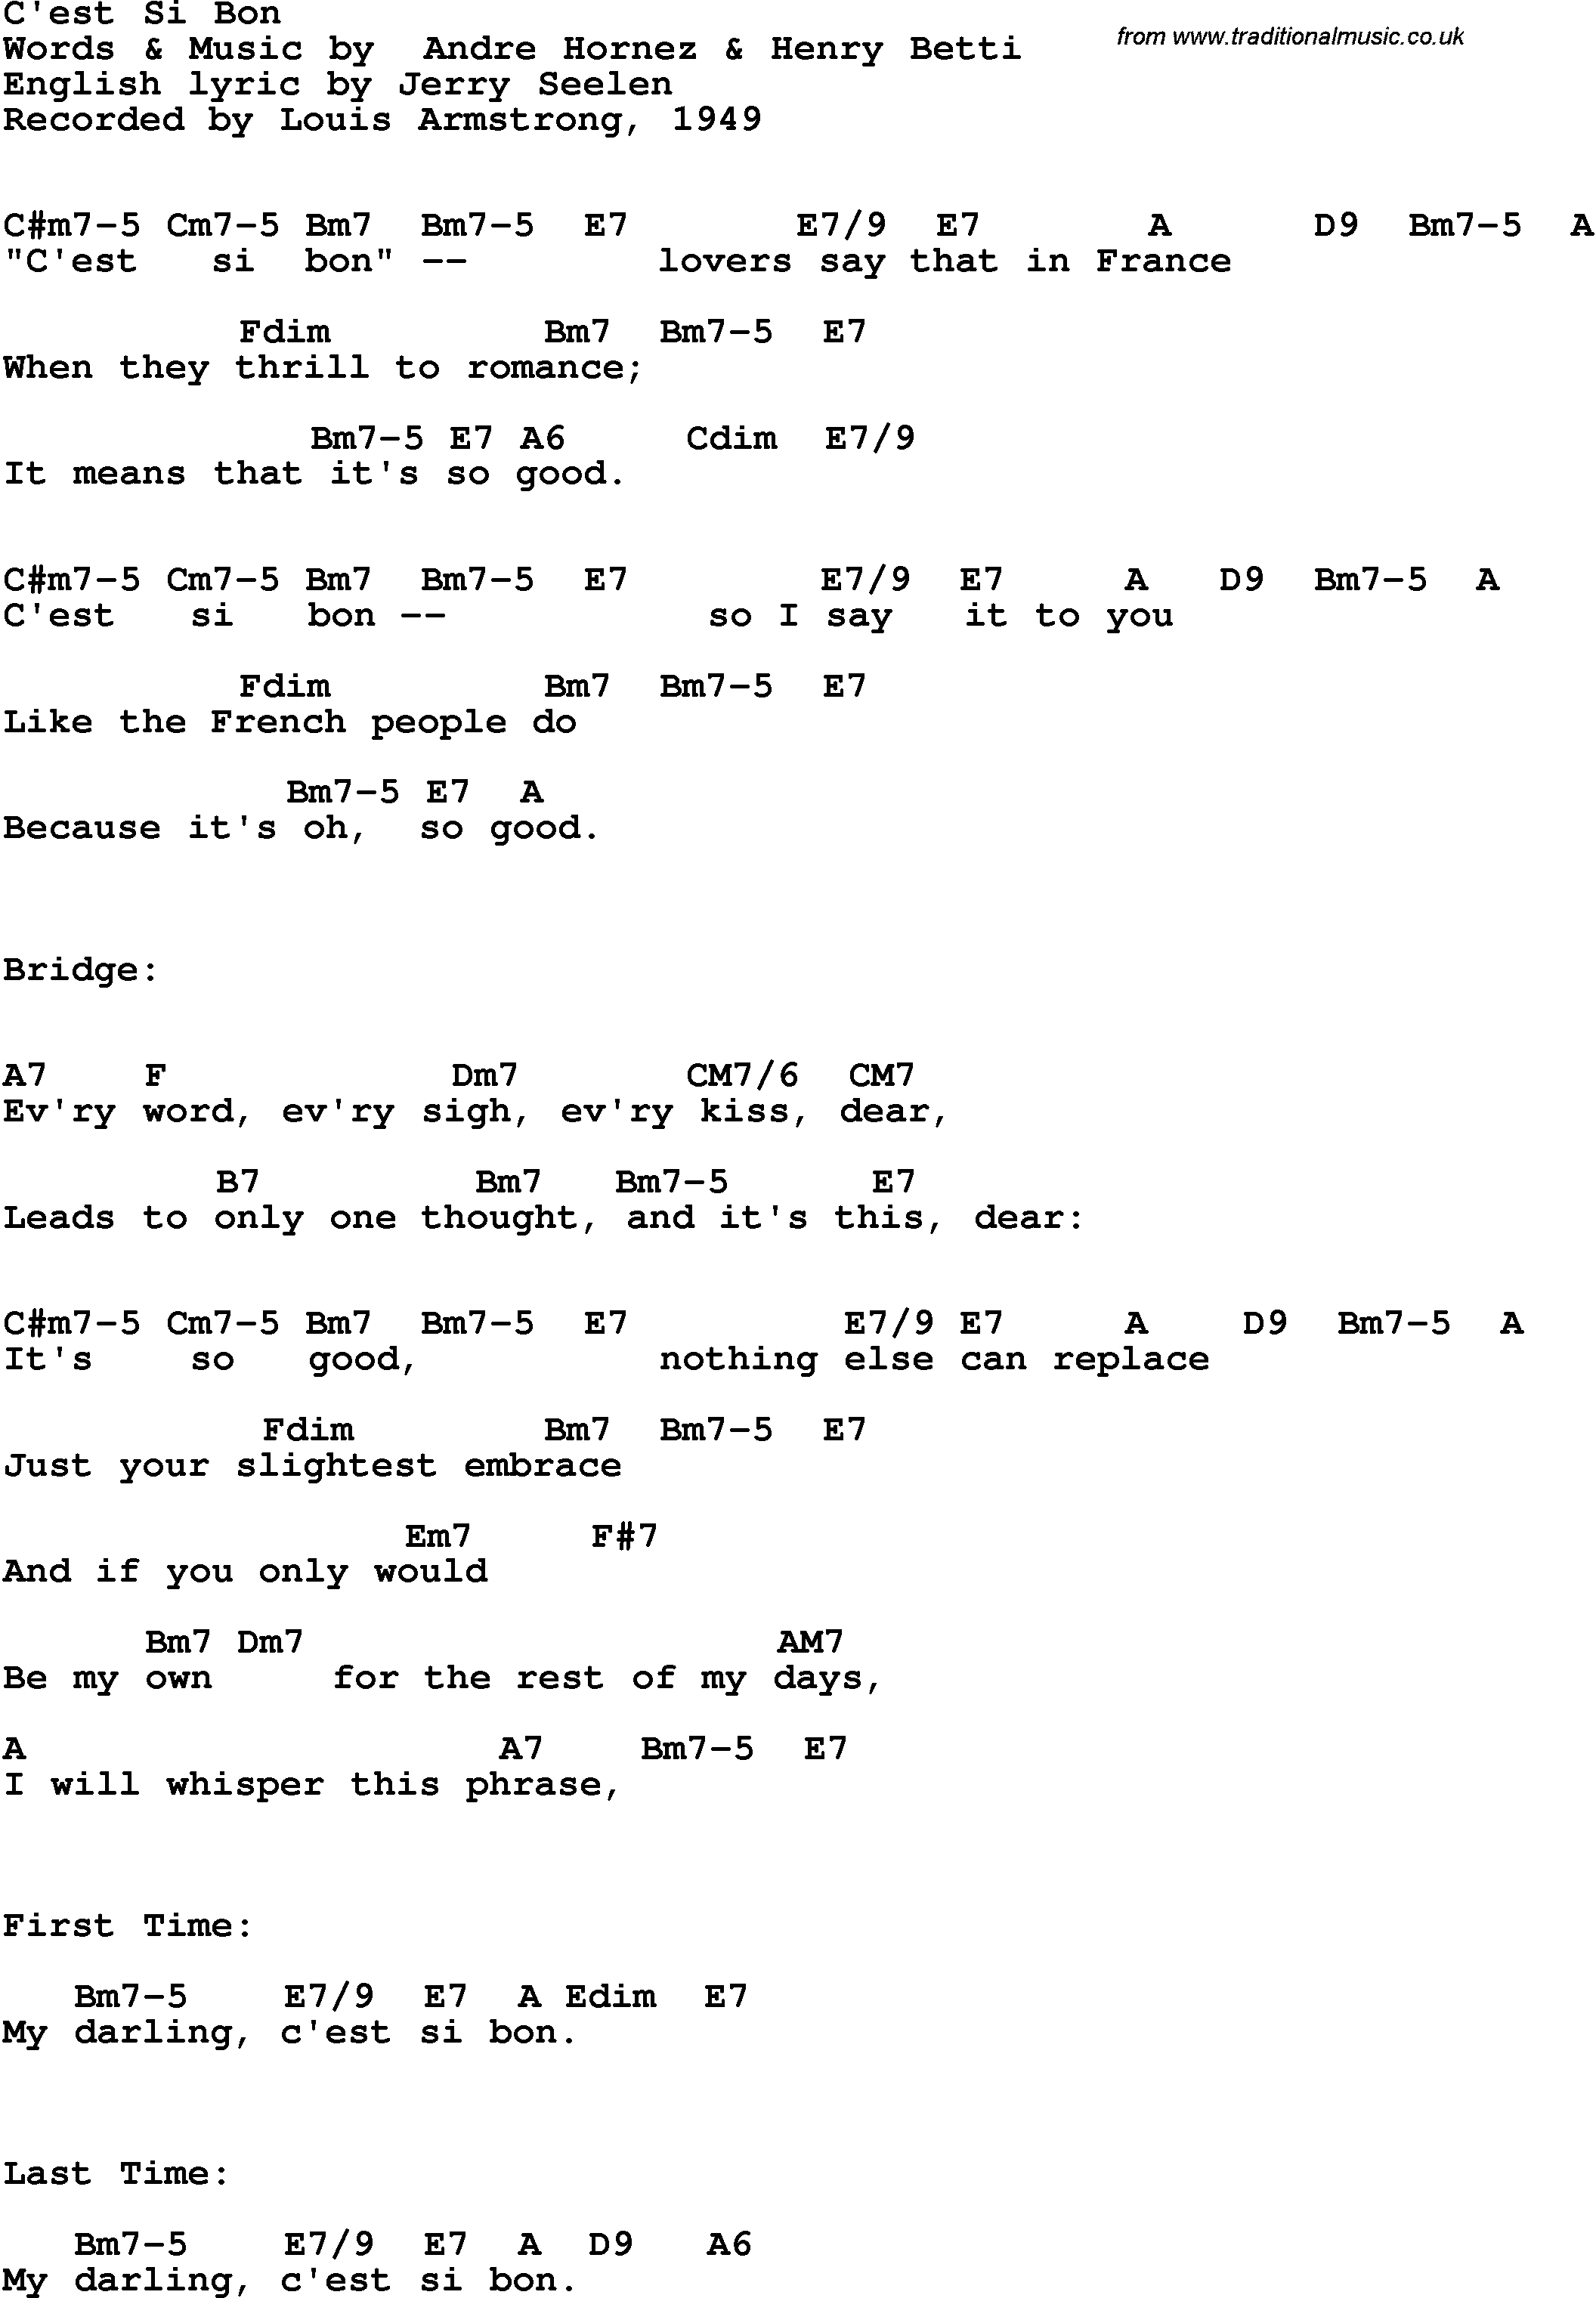 Song Lyrics with guitar chords for C'est Si Bon - Louis Armstrong, 1949